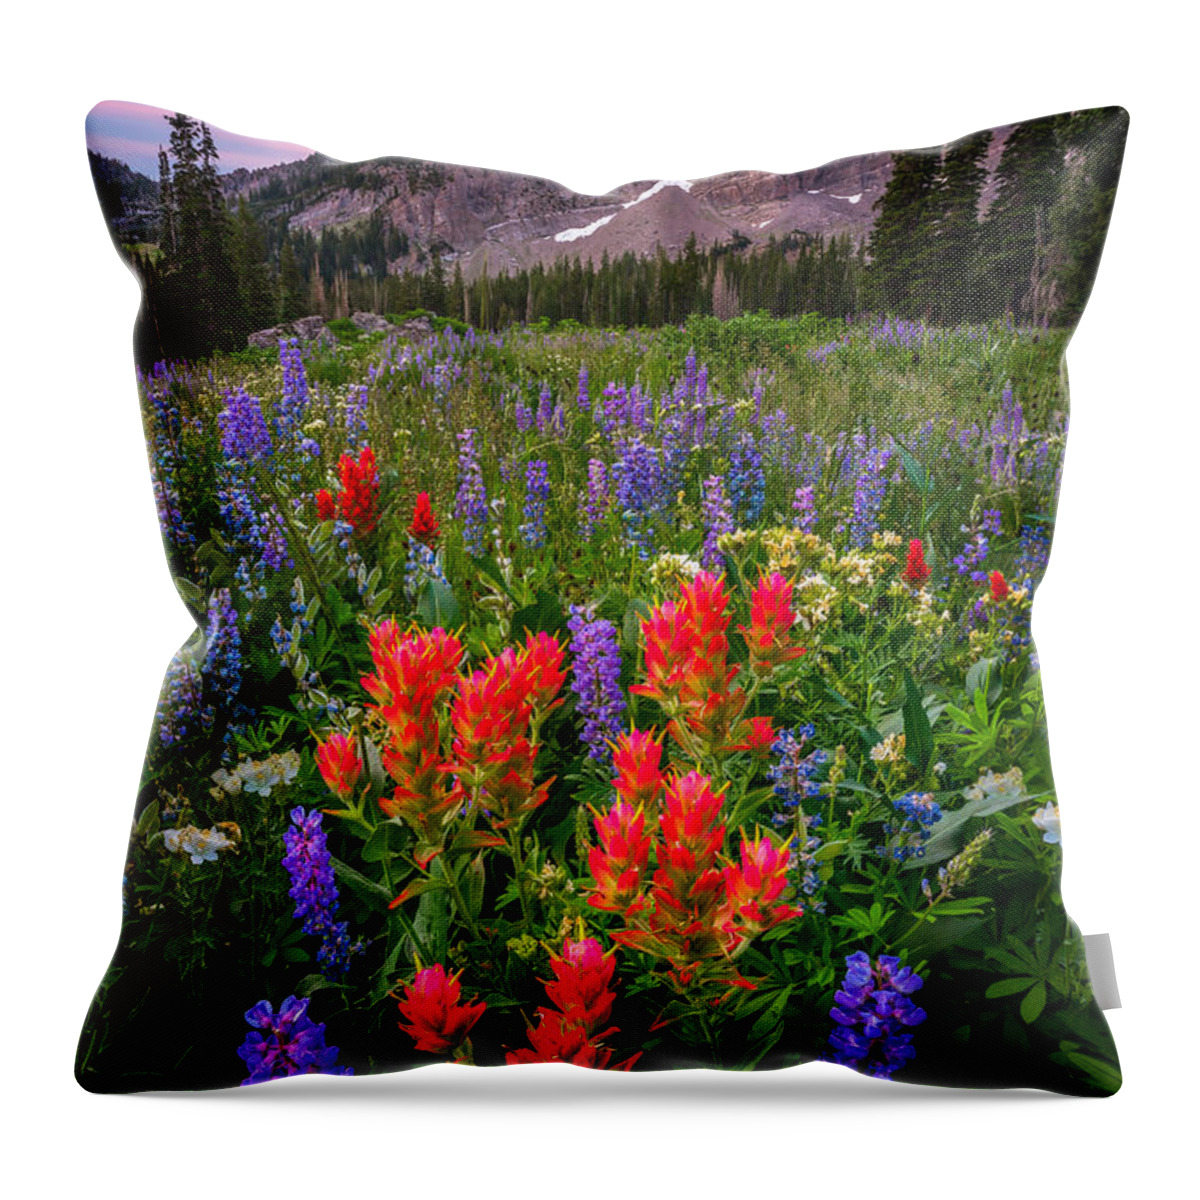 Albion Basin Throw Pillow featuring the photograph Albion Blush by Ryan Smith